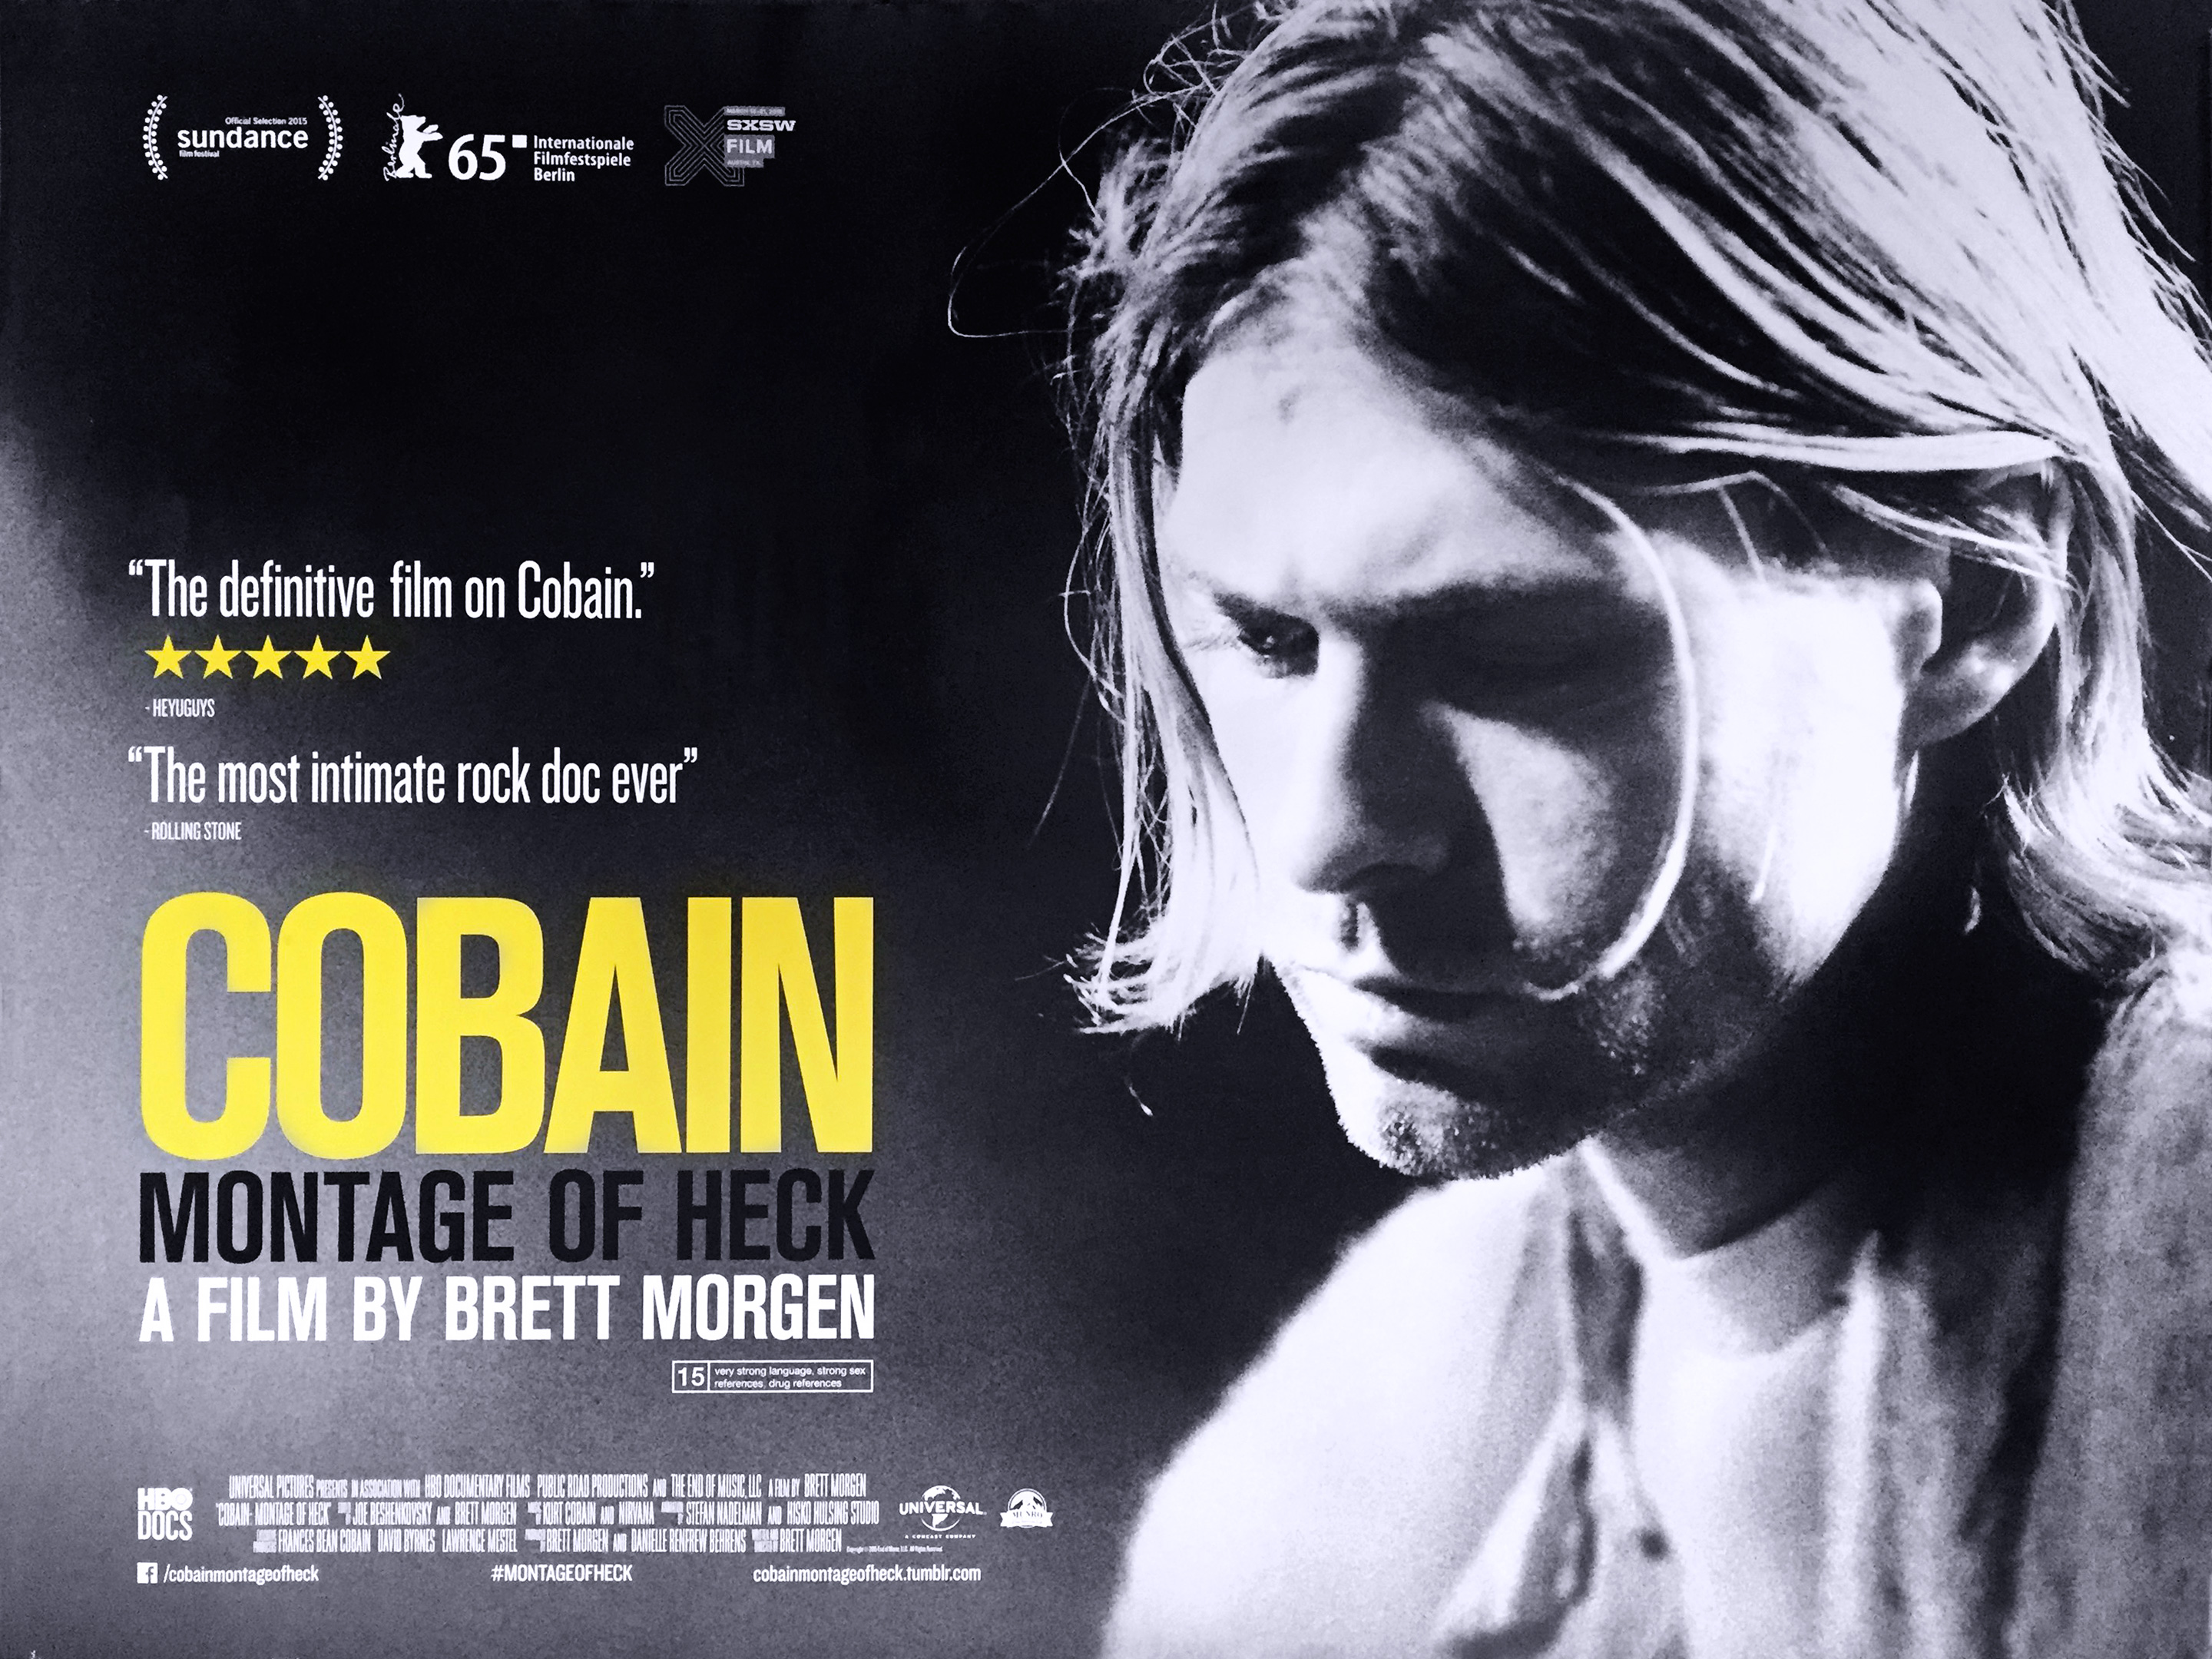 Cobain - Montage of Heck movie quad poster